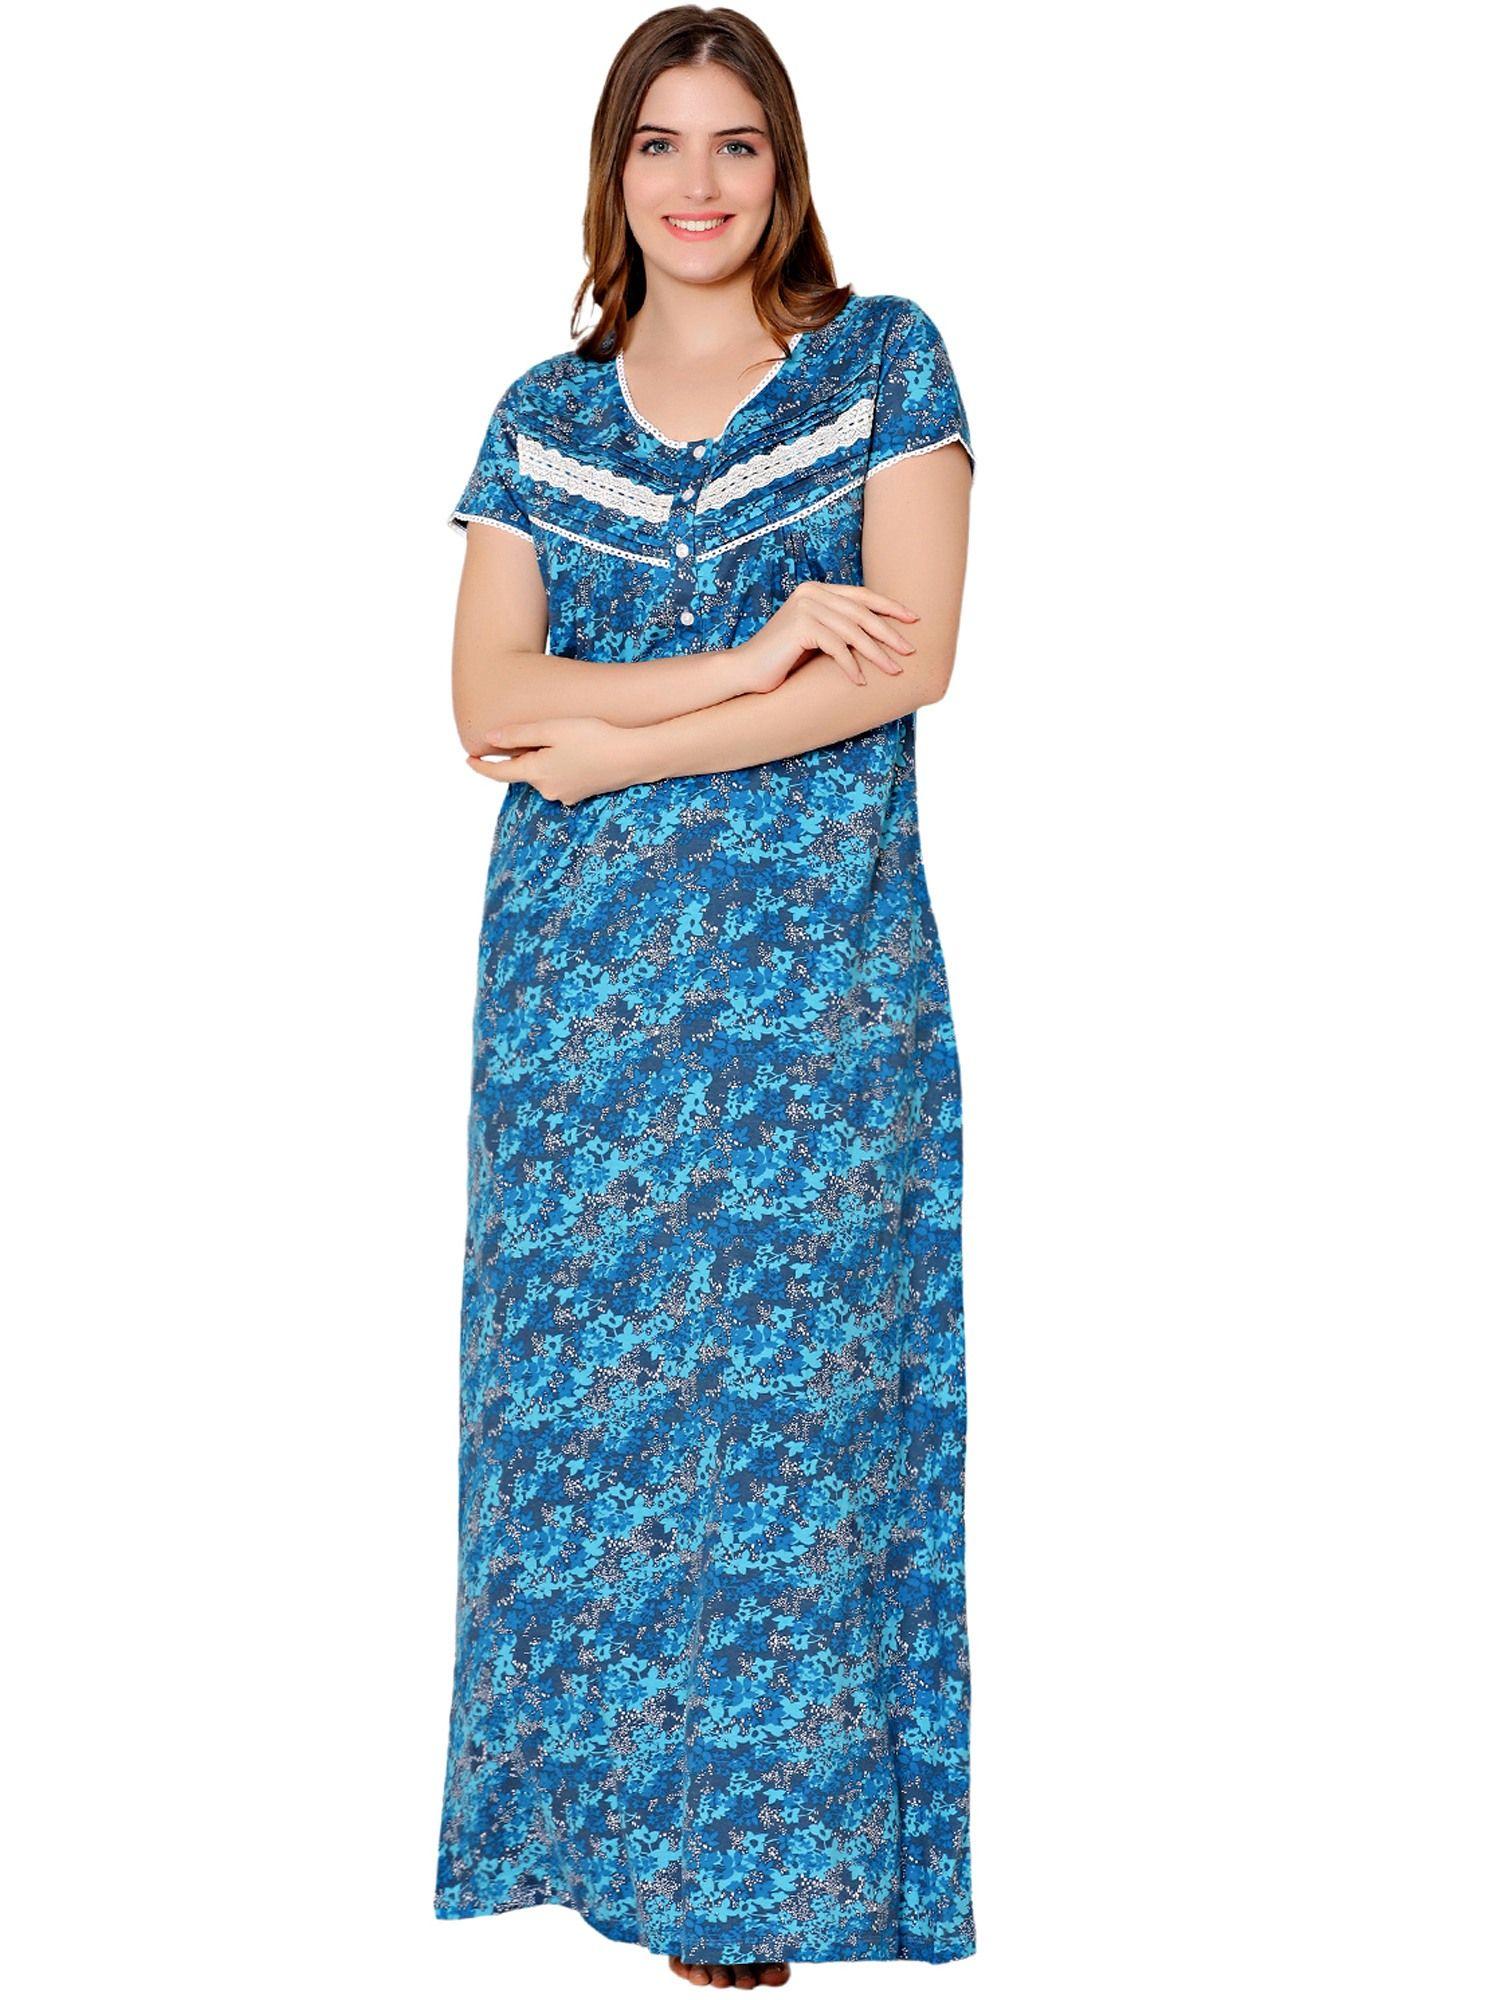 womens combed cotton round neck printed long night dress -bsn10007 blue